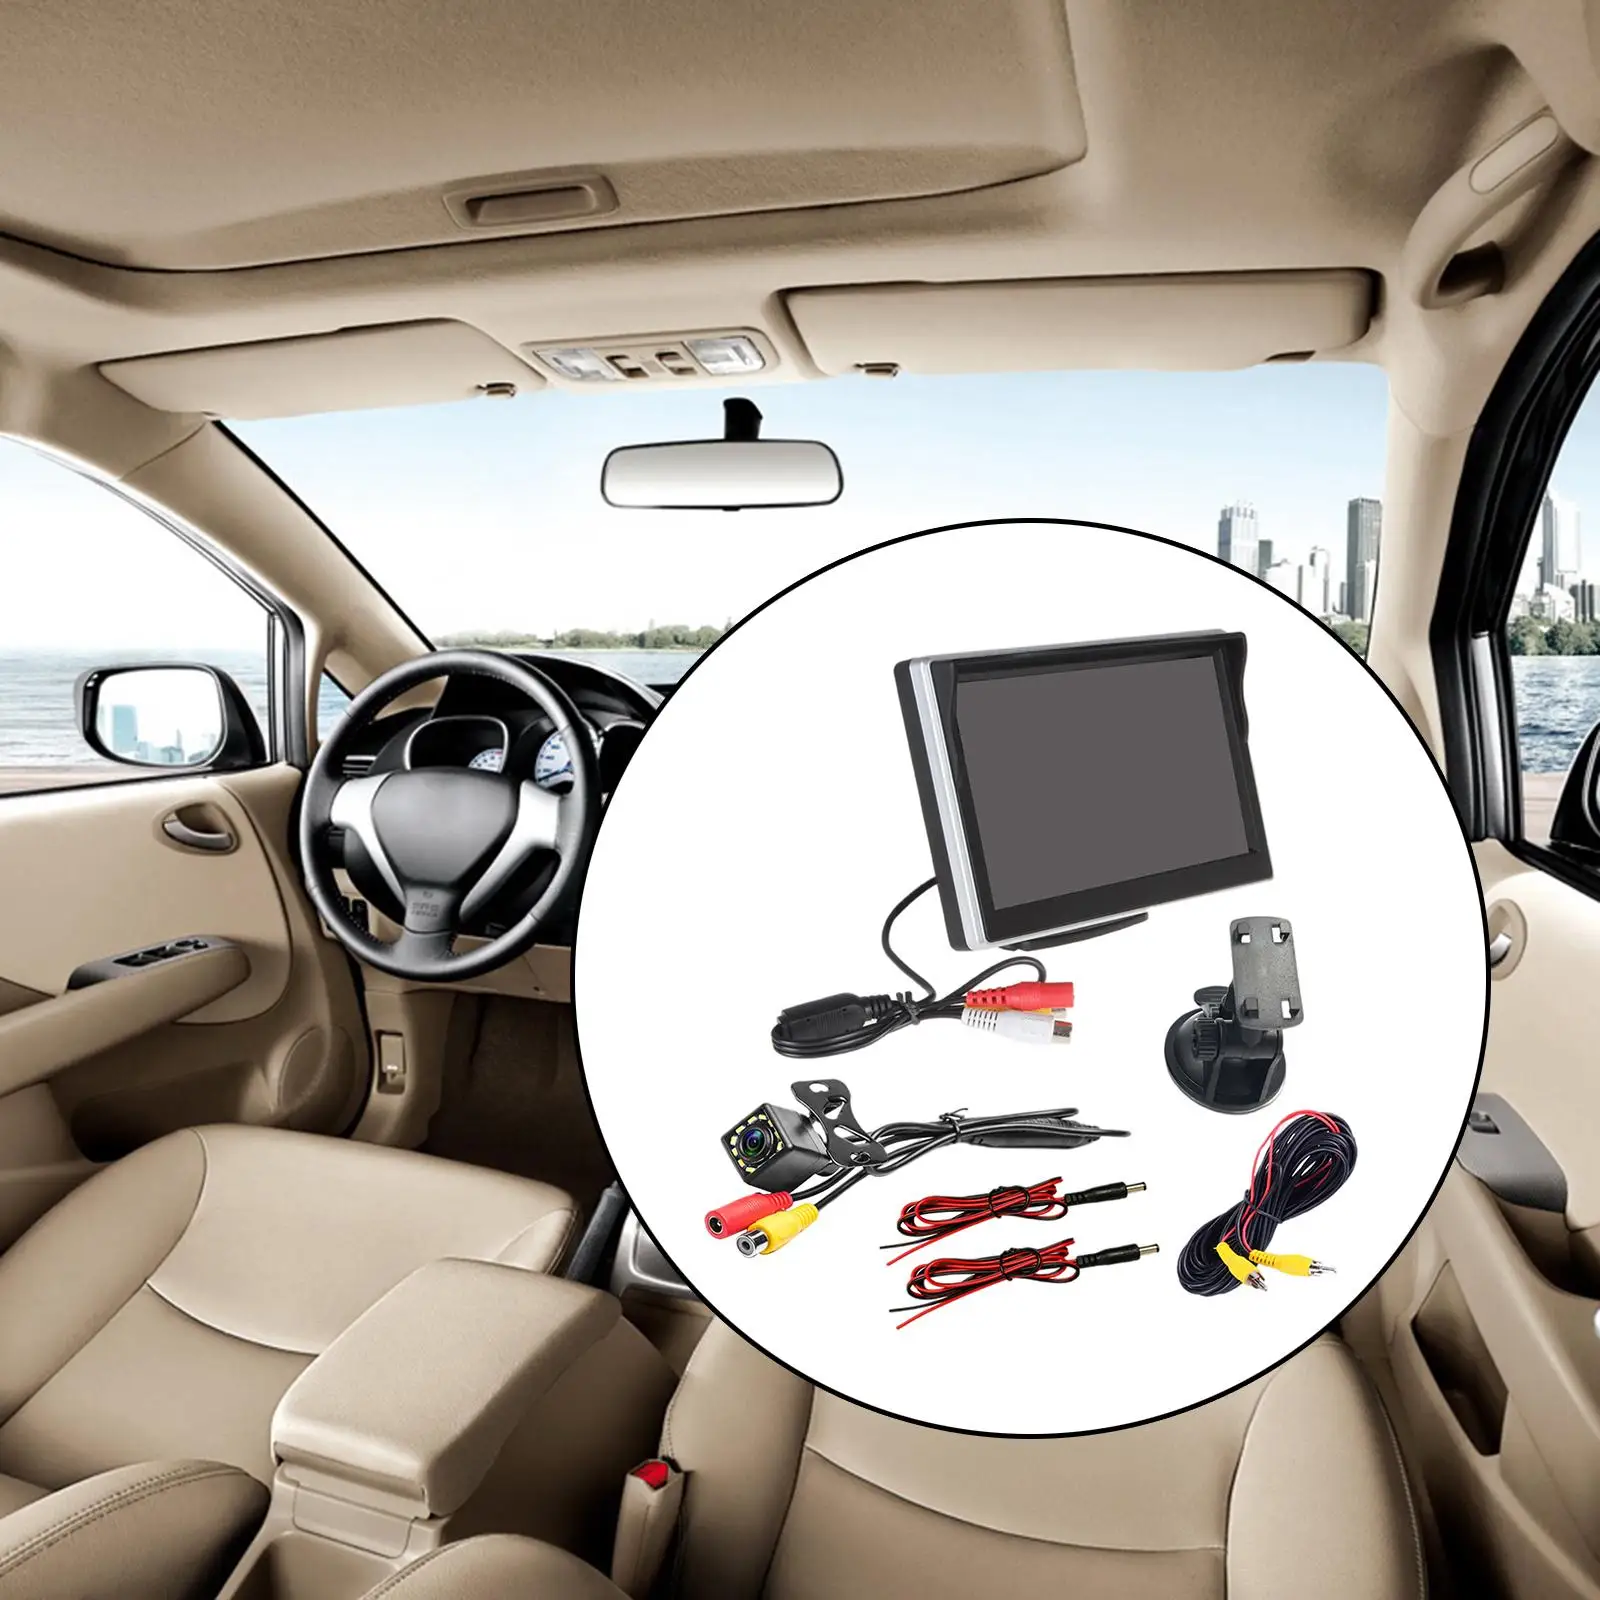 5-Inch 12 LED Car Monitor Camera Super Slim Rear View Camera System Fit for Camper